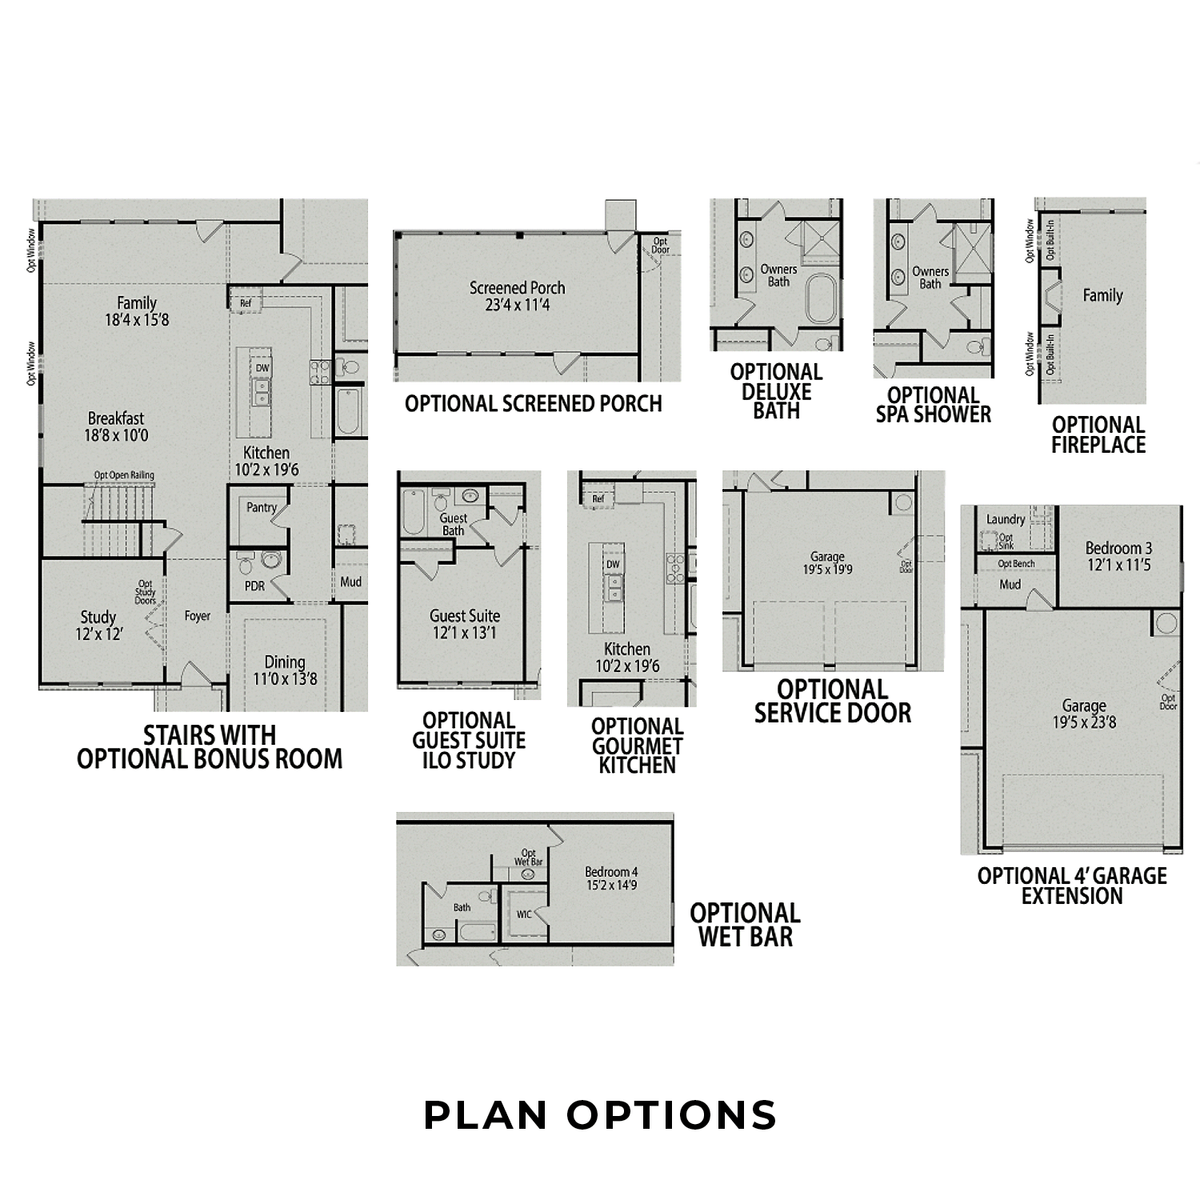 3 - The Magnolia B floor plan layout for 91 Grading Stick Court in Davidson Homes' Tobacco Road community.